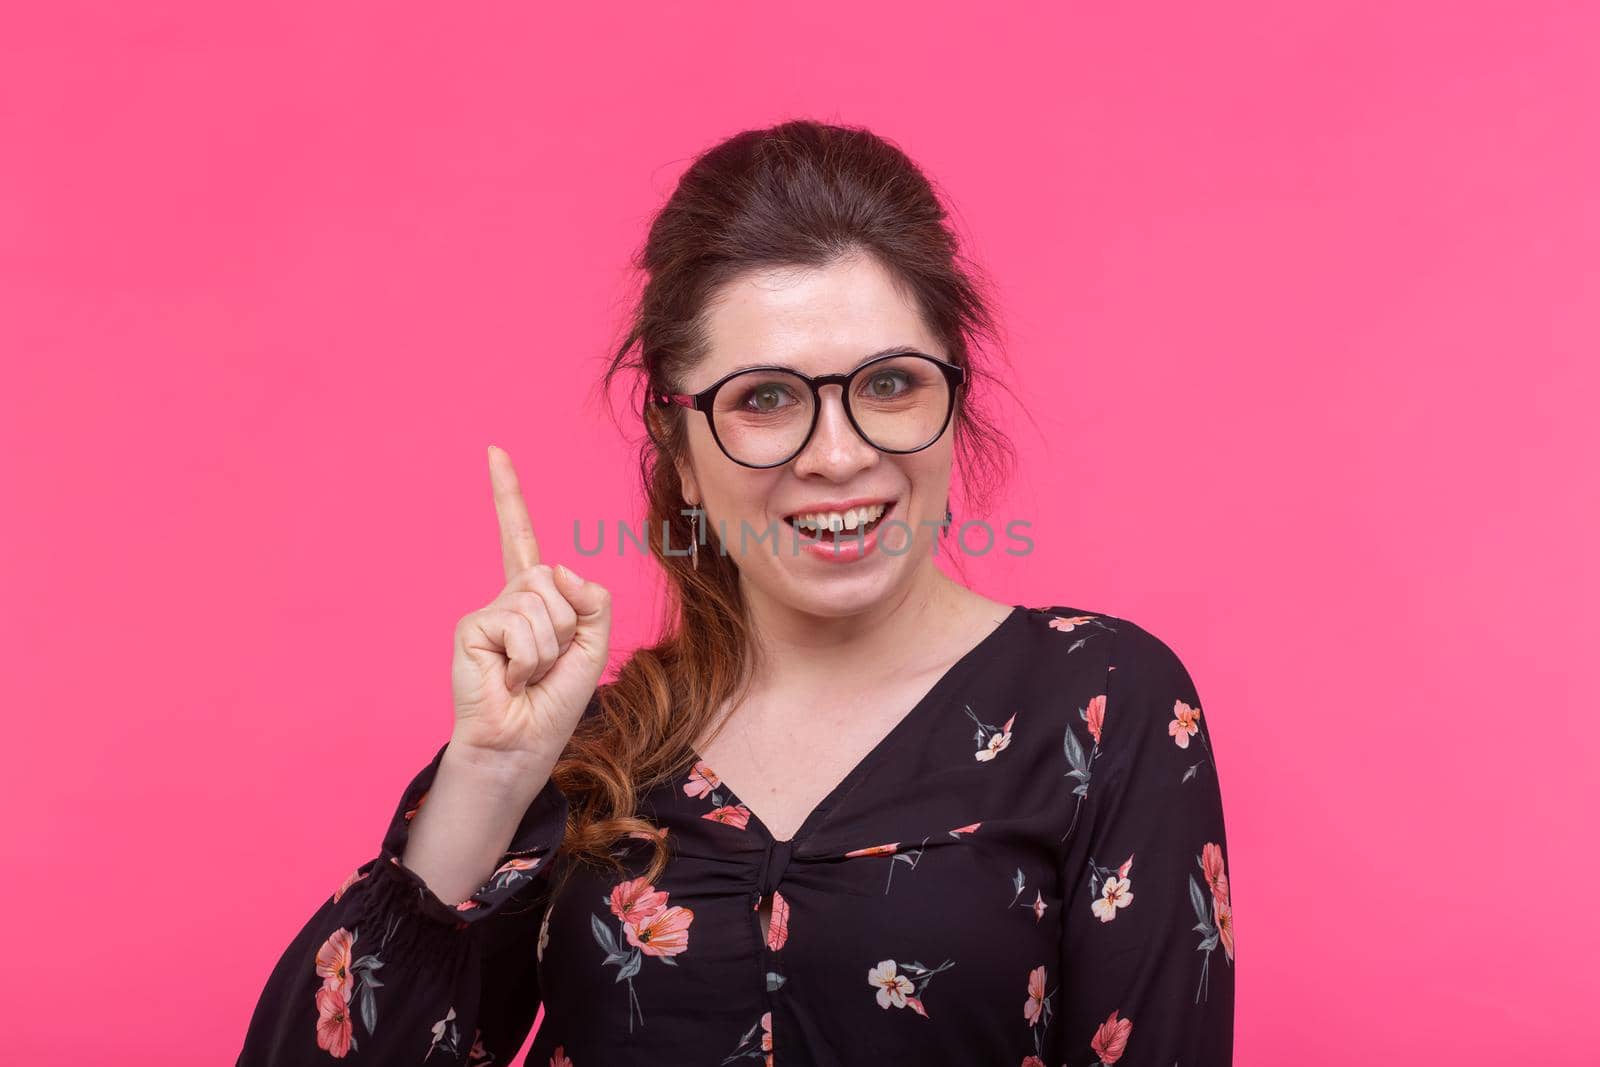 Portrait of a young beautiful romantic young female student with glasses showing her finger up posing on a pink background. Space for advertising. Concept of new ideas